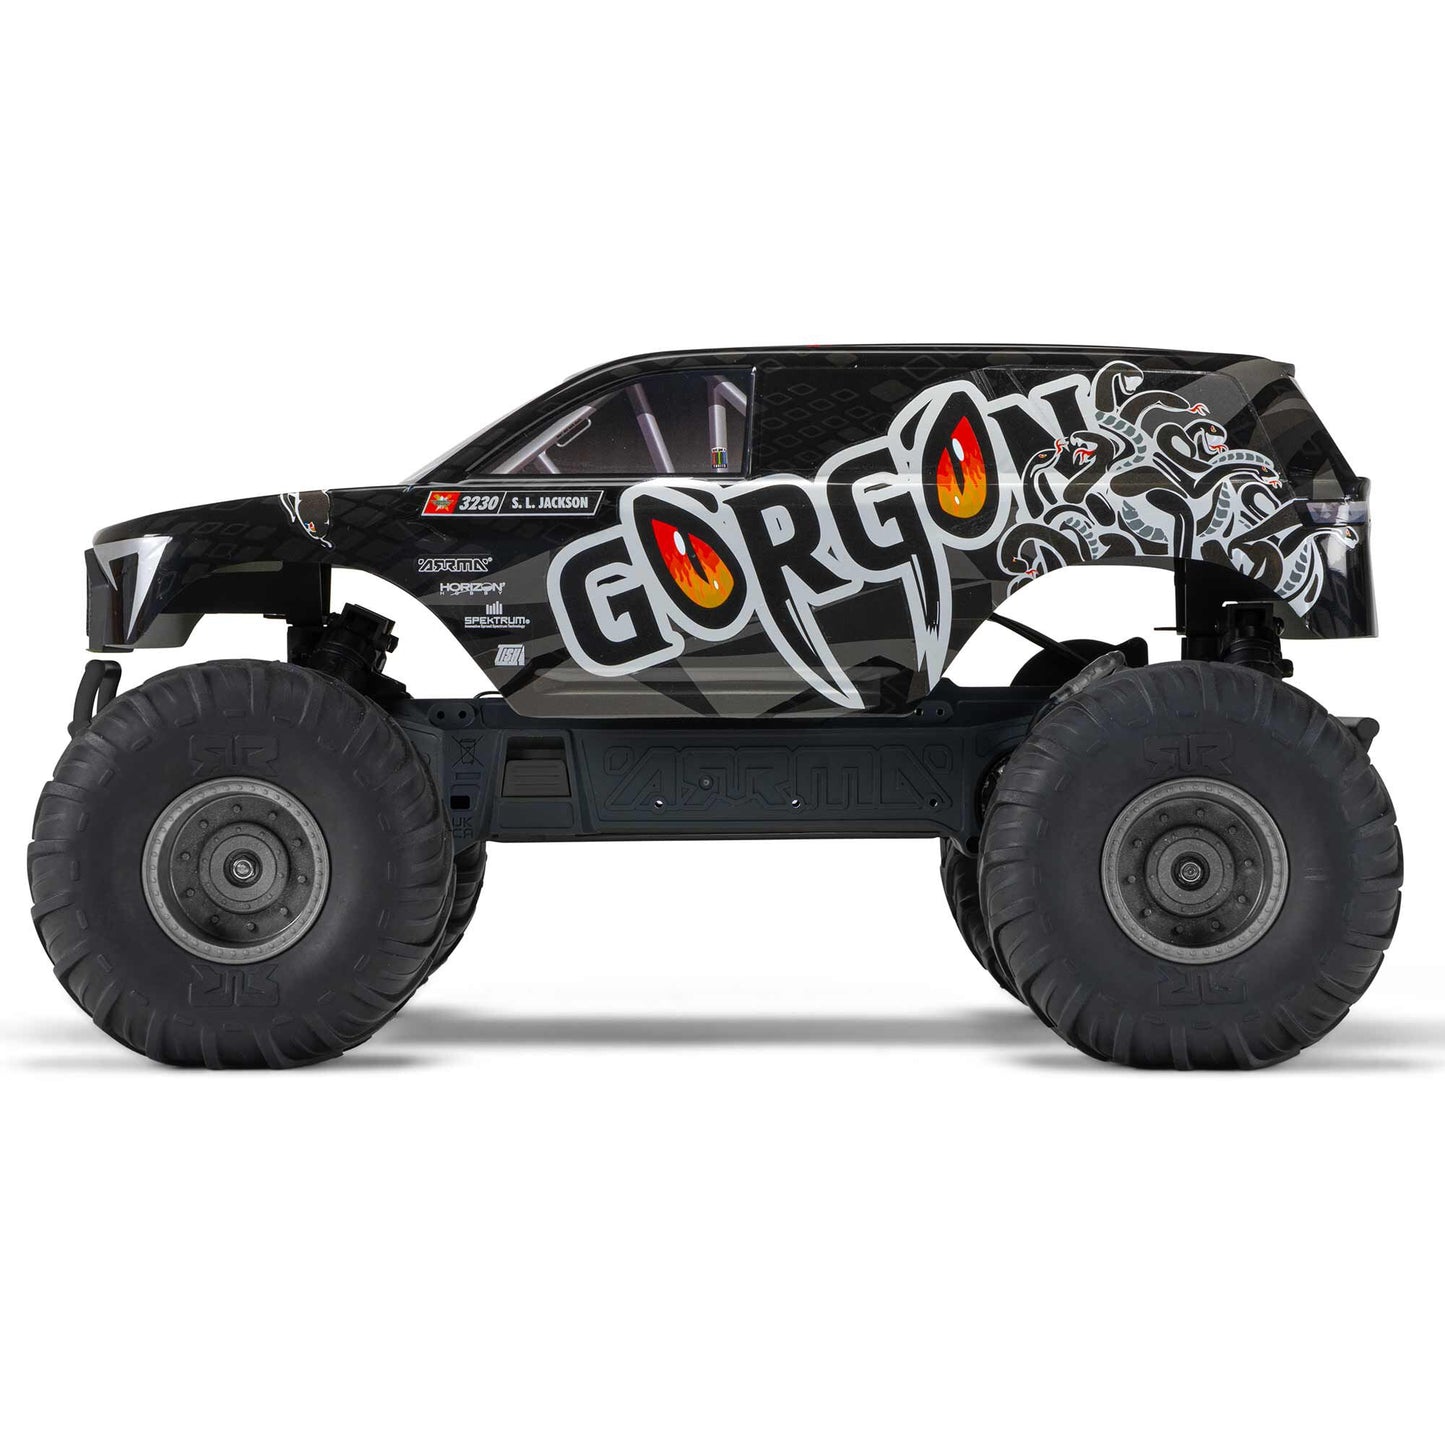 GORGON 4X2 Monster Truck Ready-To-Assemble KIT with Battery & Charger